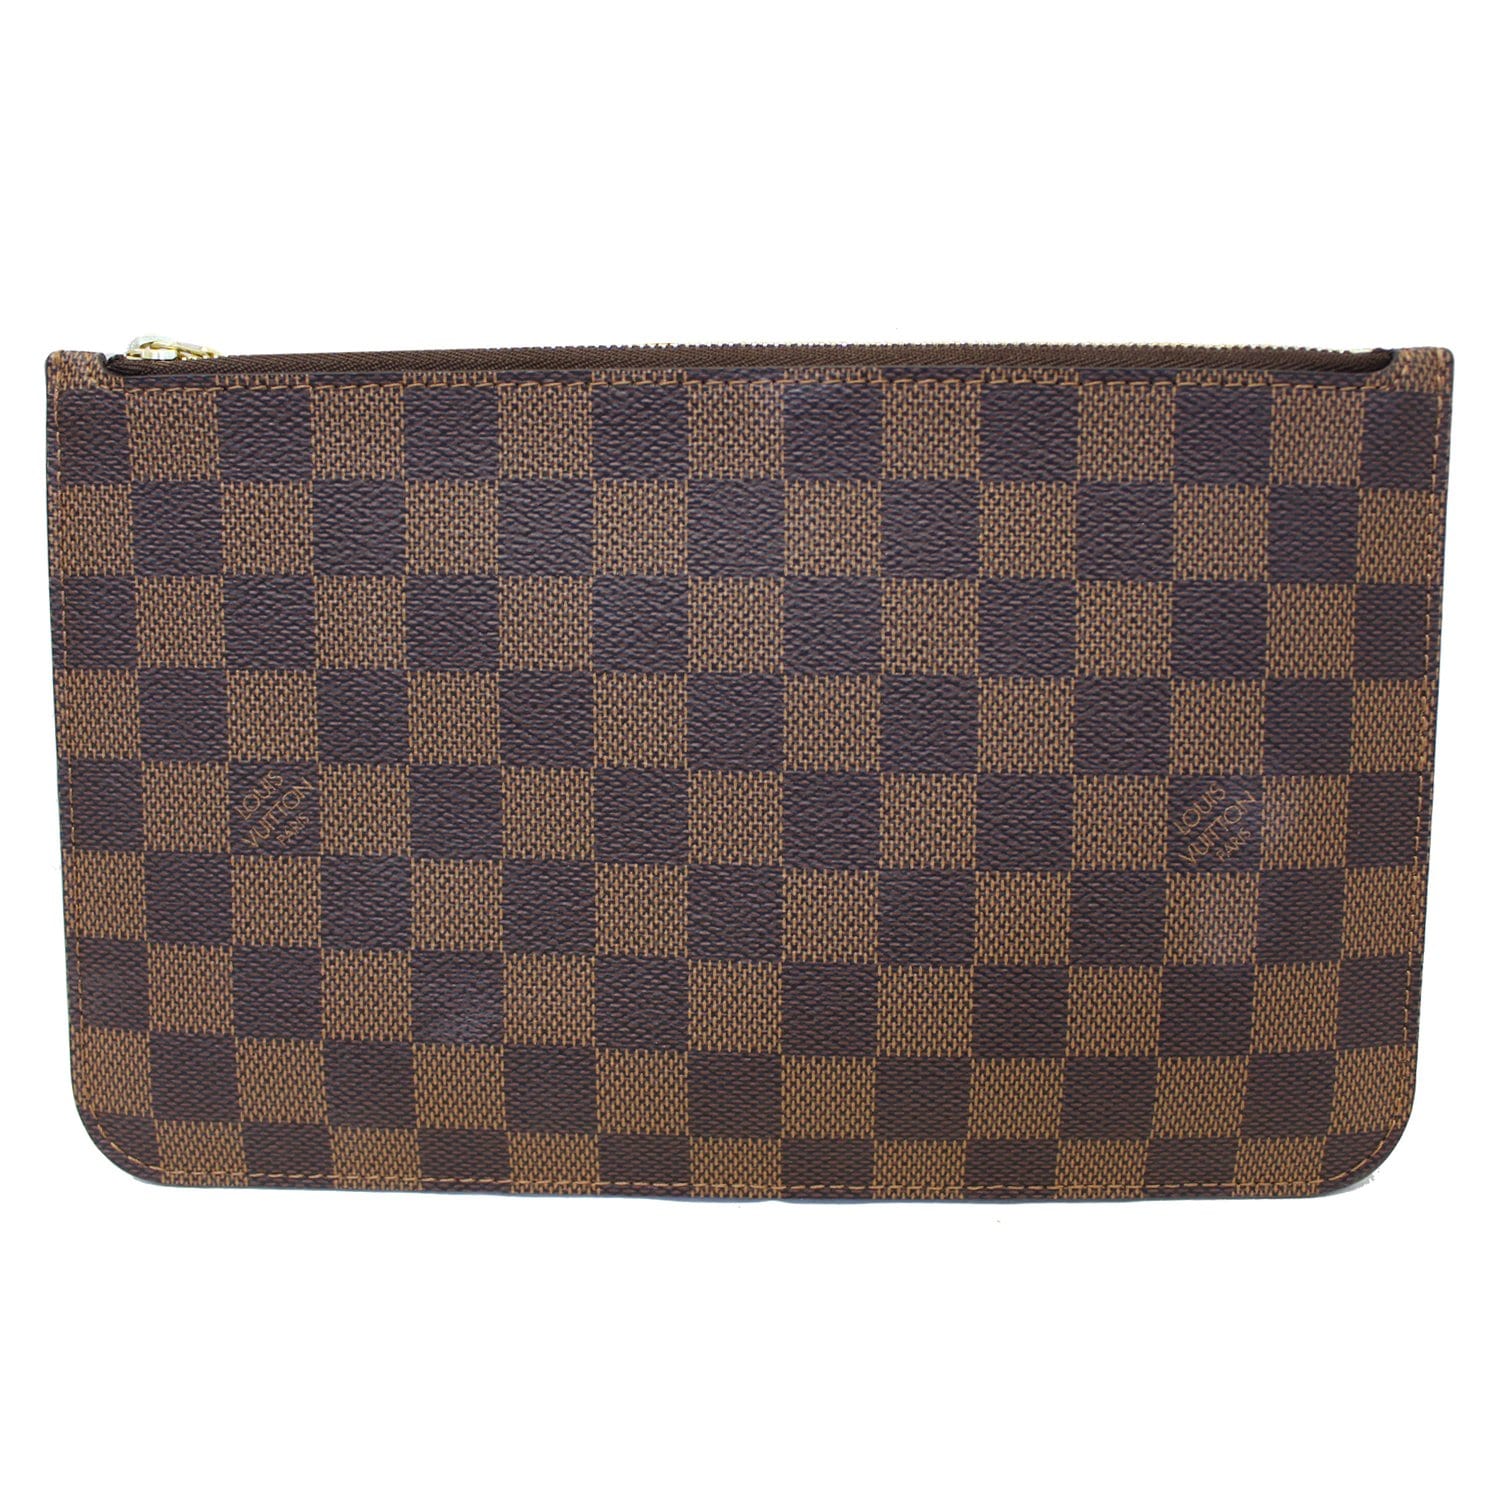 Only 195.00 usd for Louis Vuitton Damier Ebene Wristlet Online at